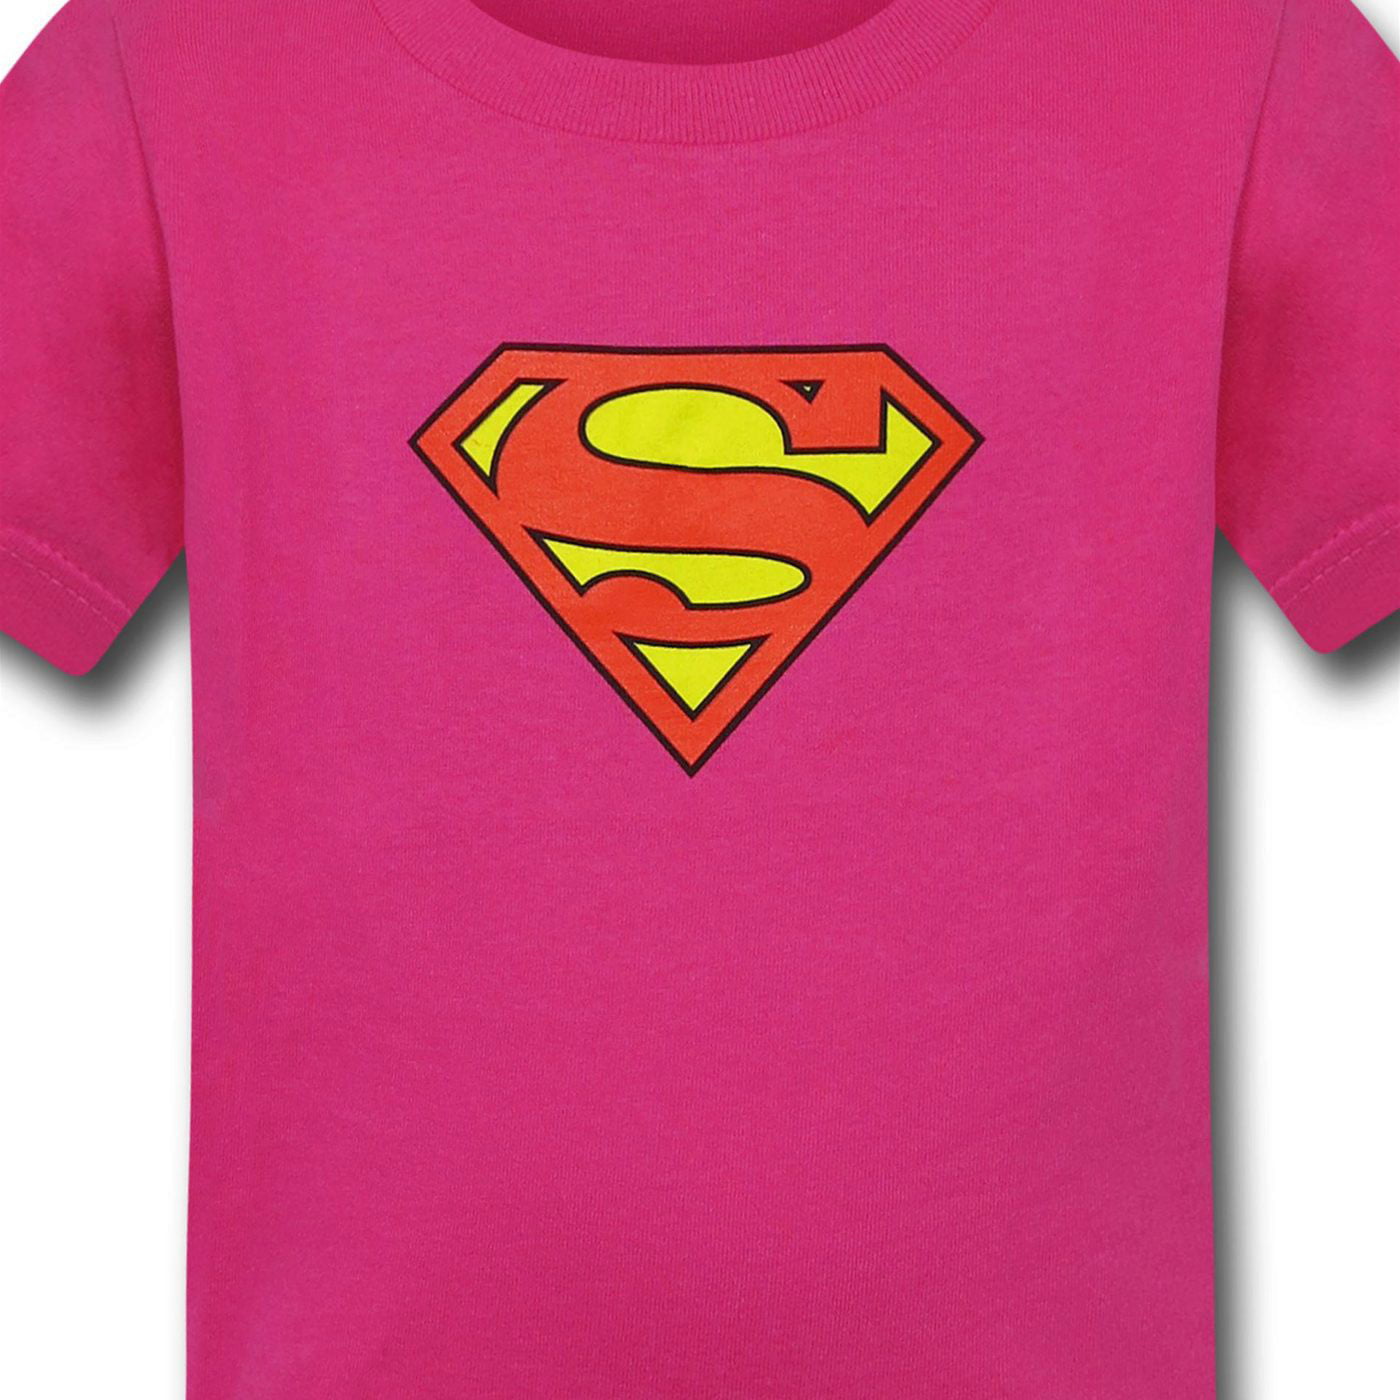 GIRL T-SHIRT Tee DARK PINK SUPERGIRL SZ 2T 3T 4T or 5T PERSONALIZED High Quality 